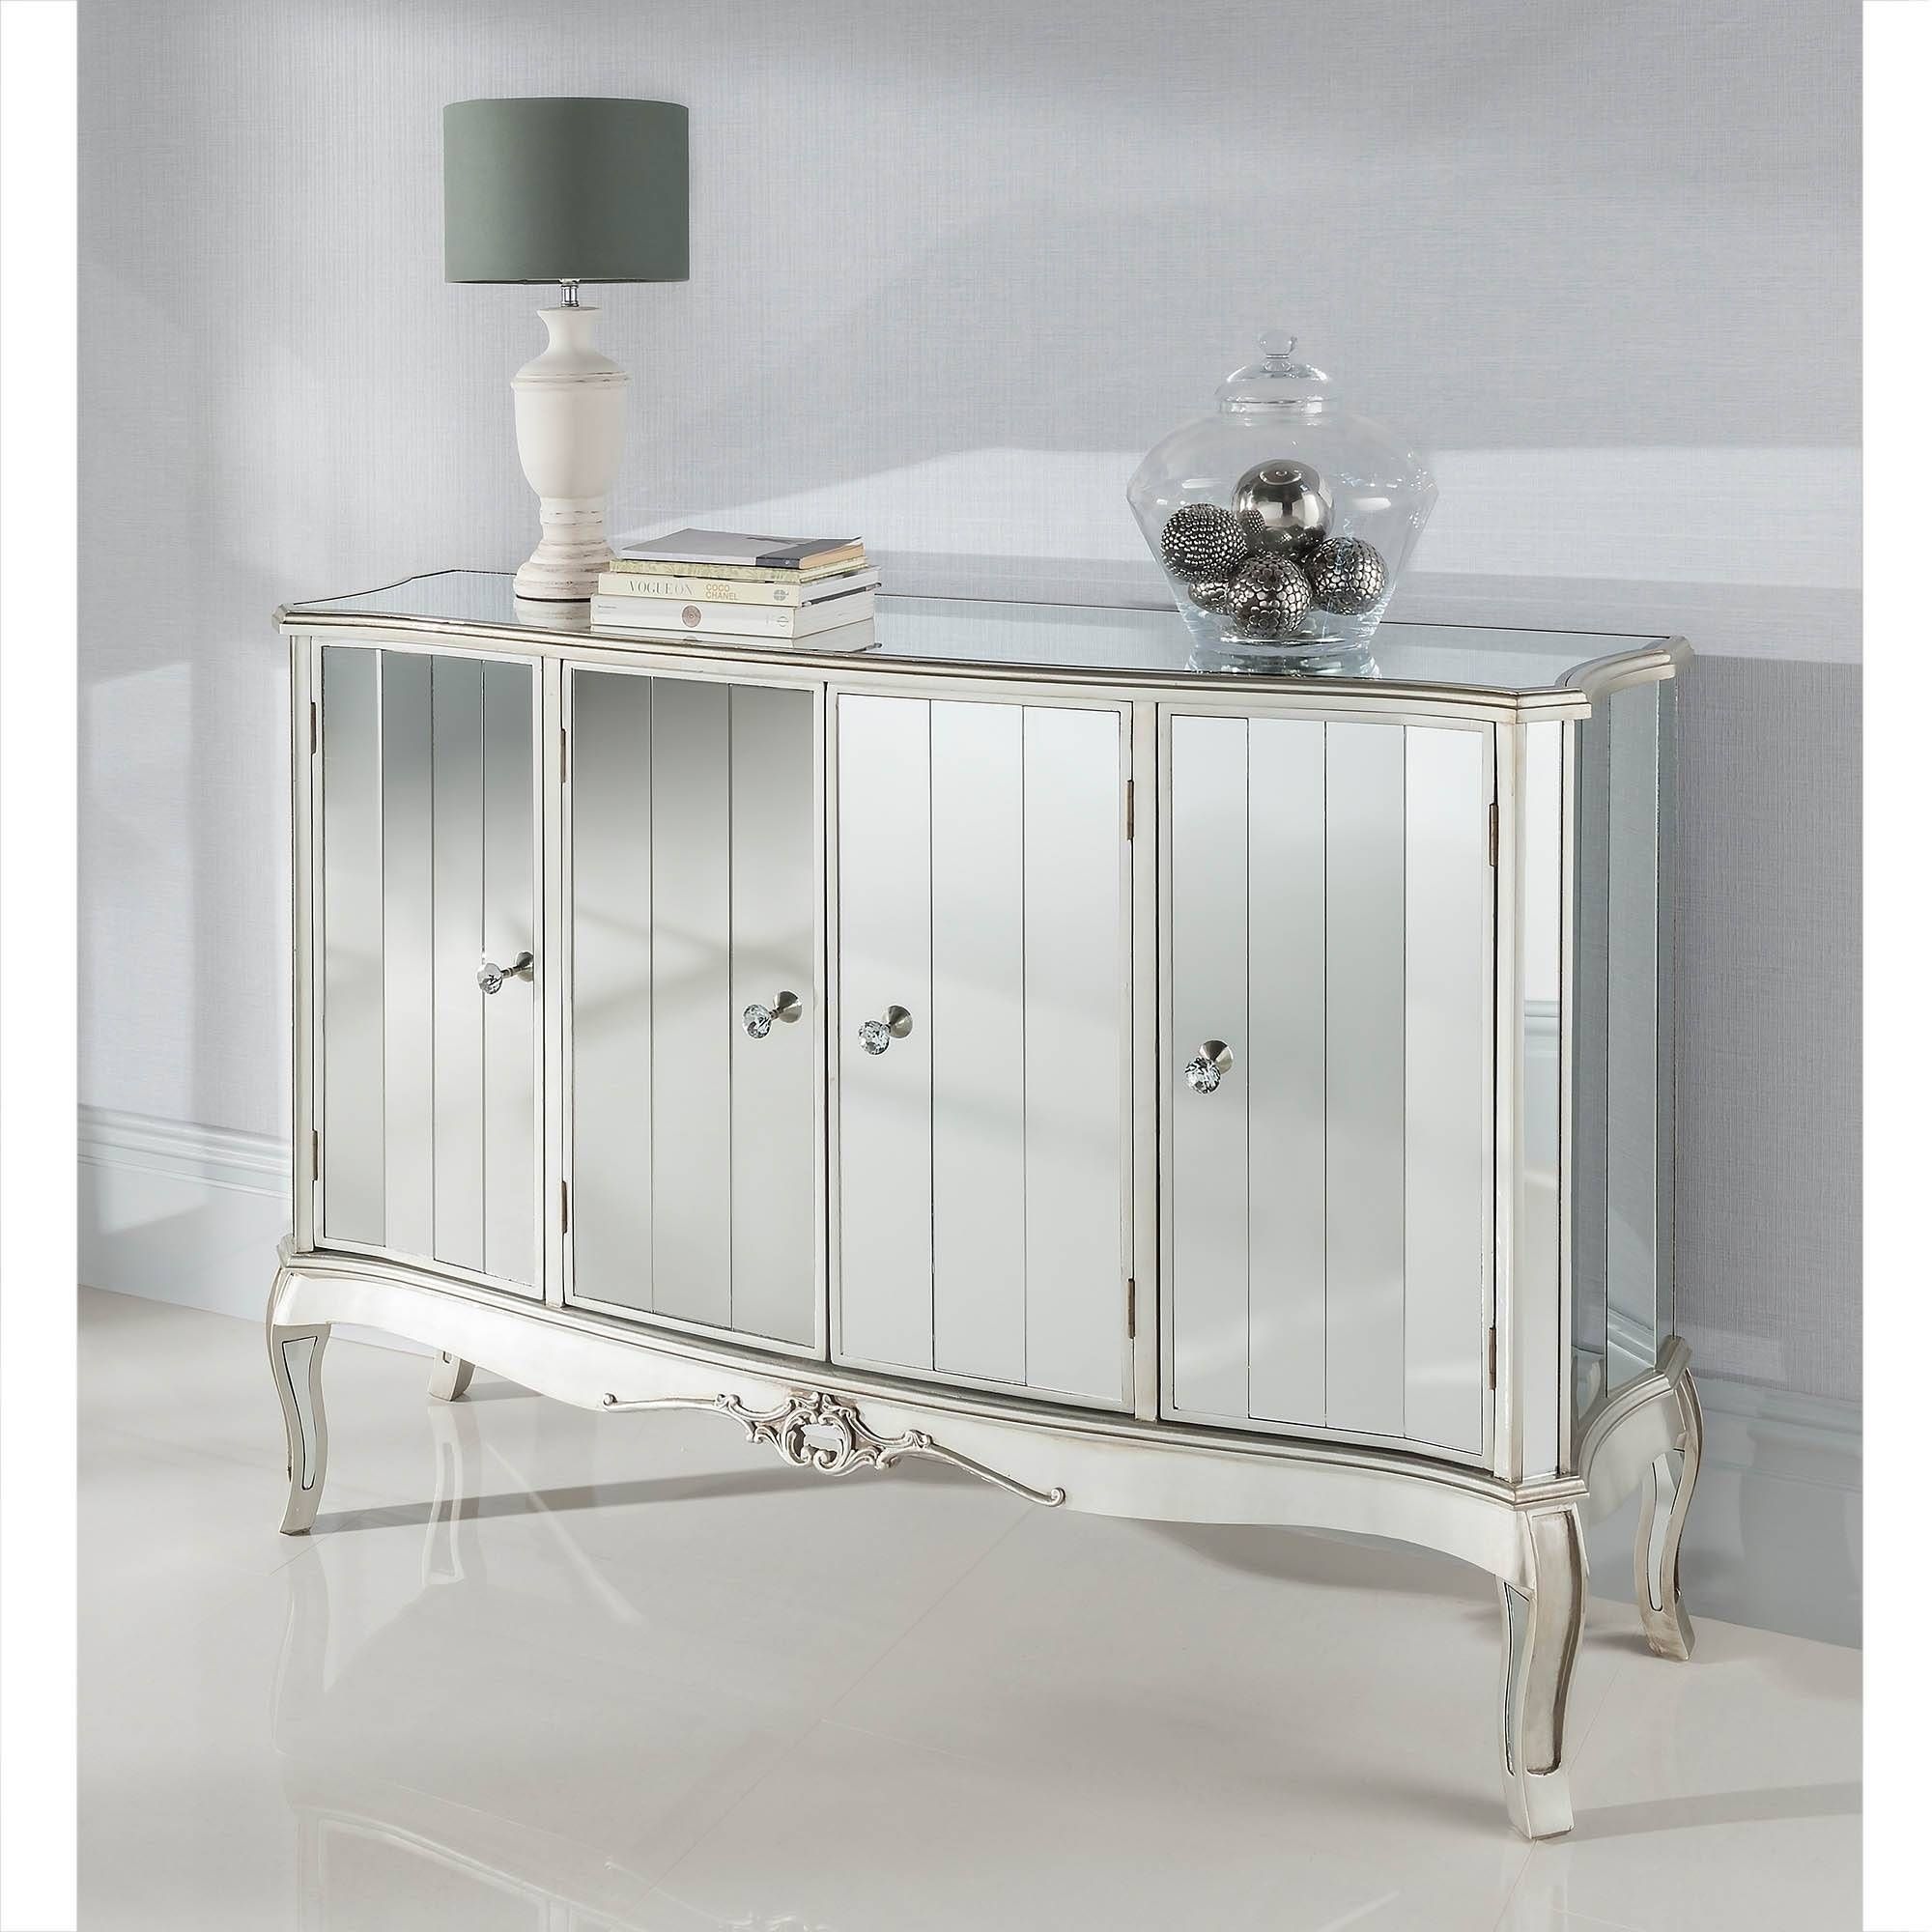 Argente Mirrored Four Door Sideboard | Mirrored Furniture Intended For White Mirrored Sideboard (View 15 of 20)